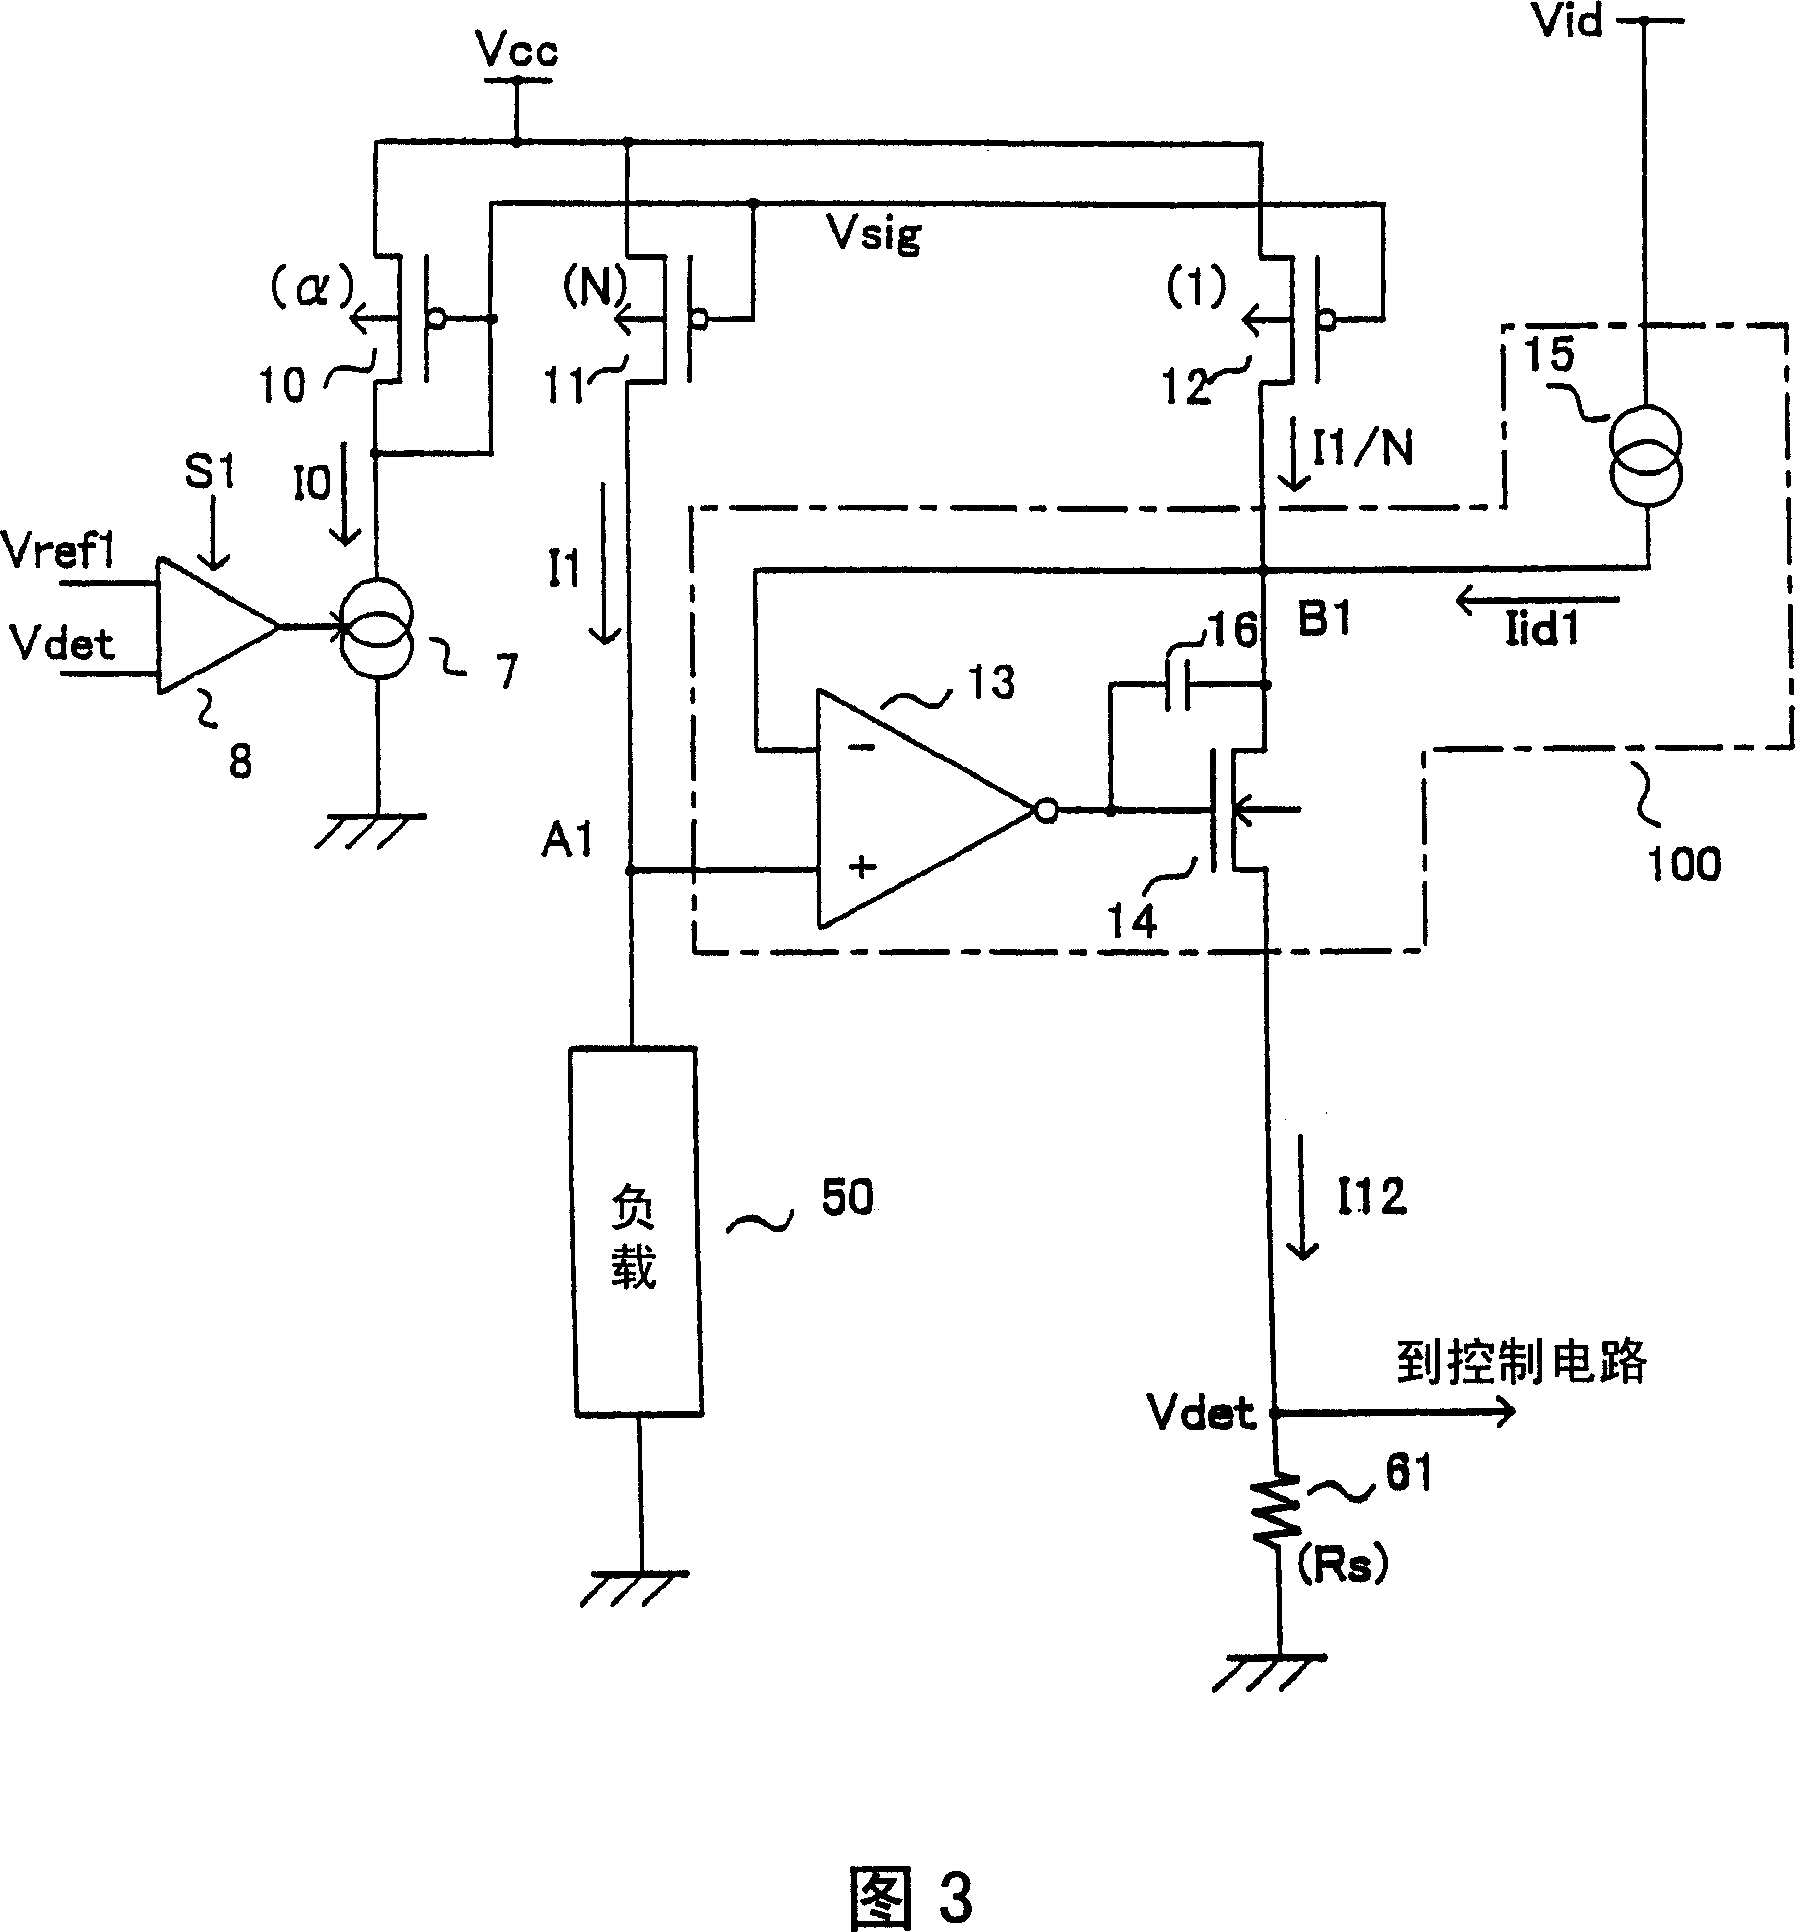 Current detecting circuit, load drive, and storage